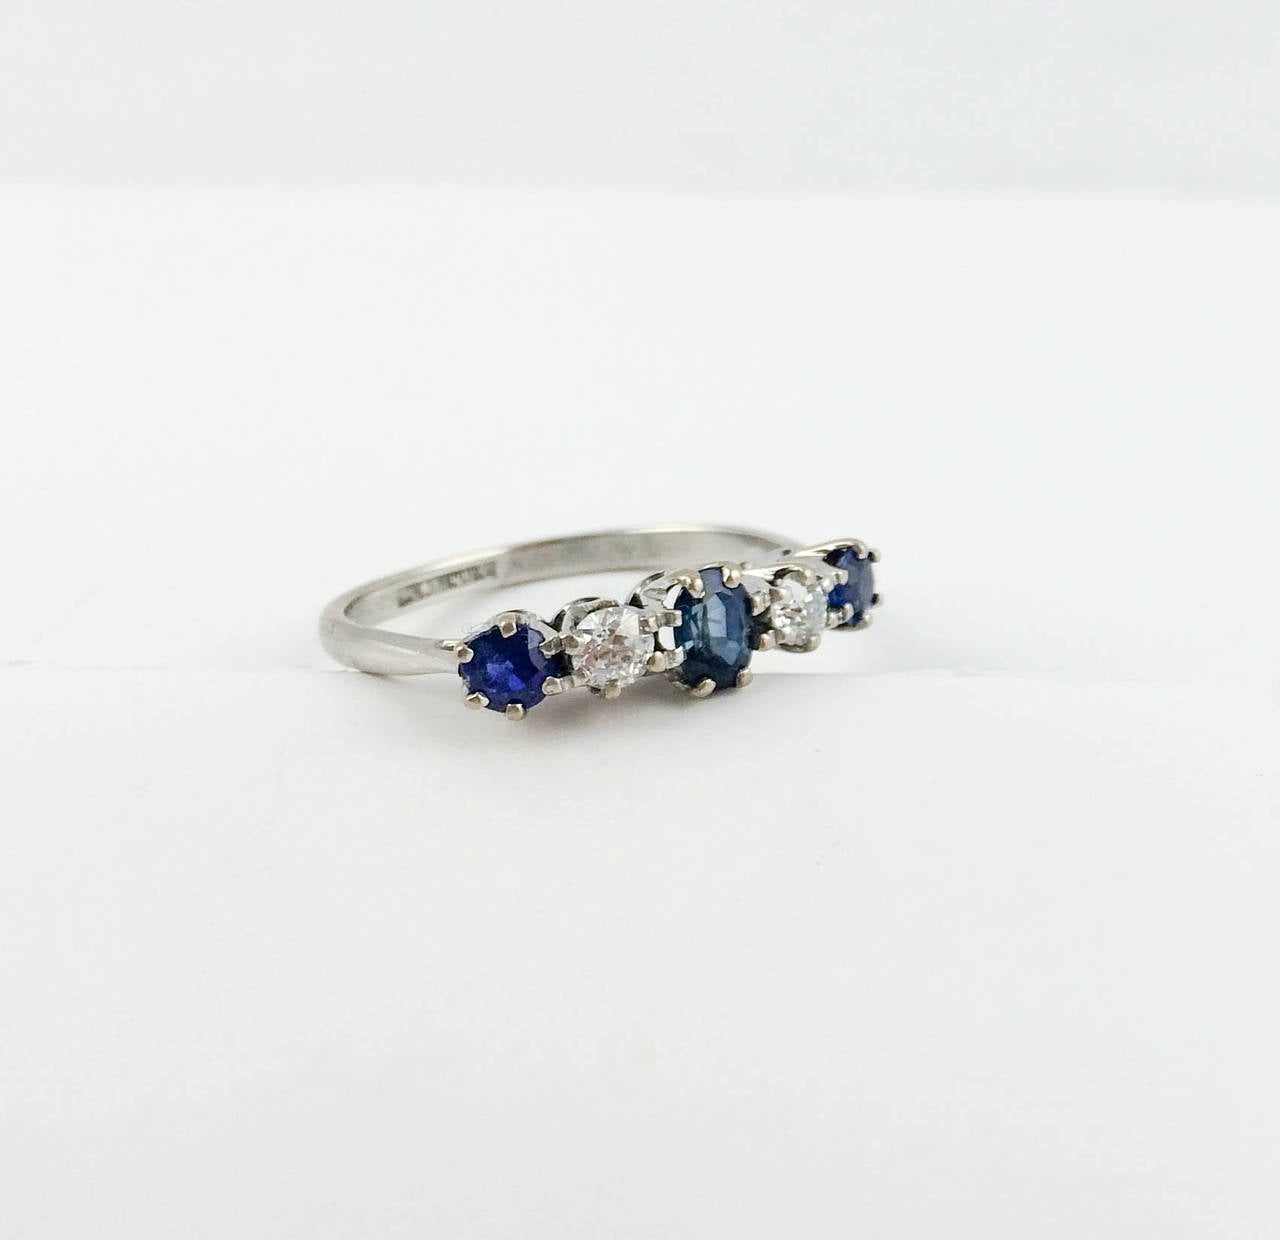 Platinum, Sapphire and Diamond Ring - 1930s In Excellent Condition For Sale In London, Chelsea